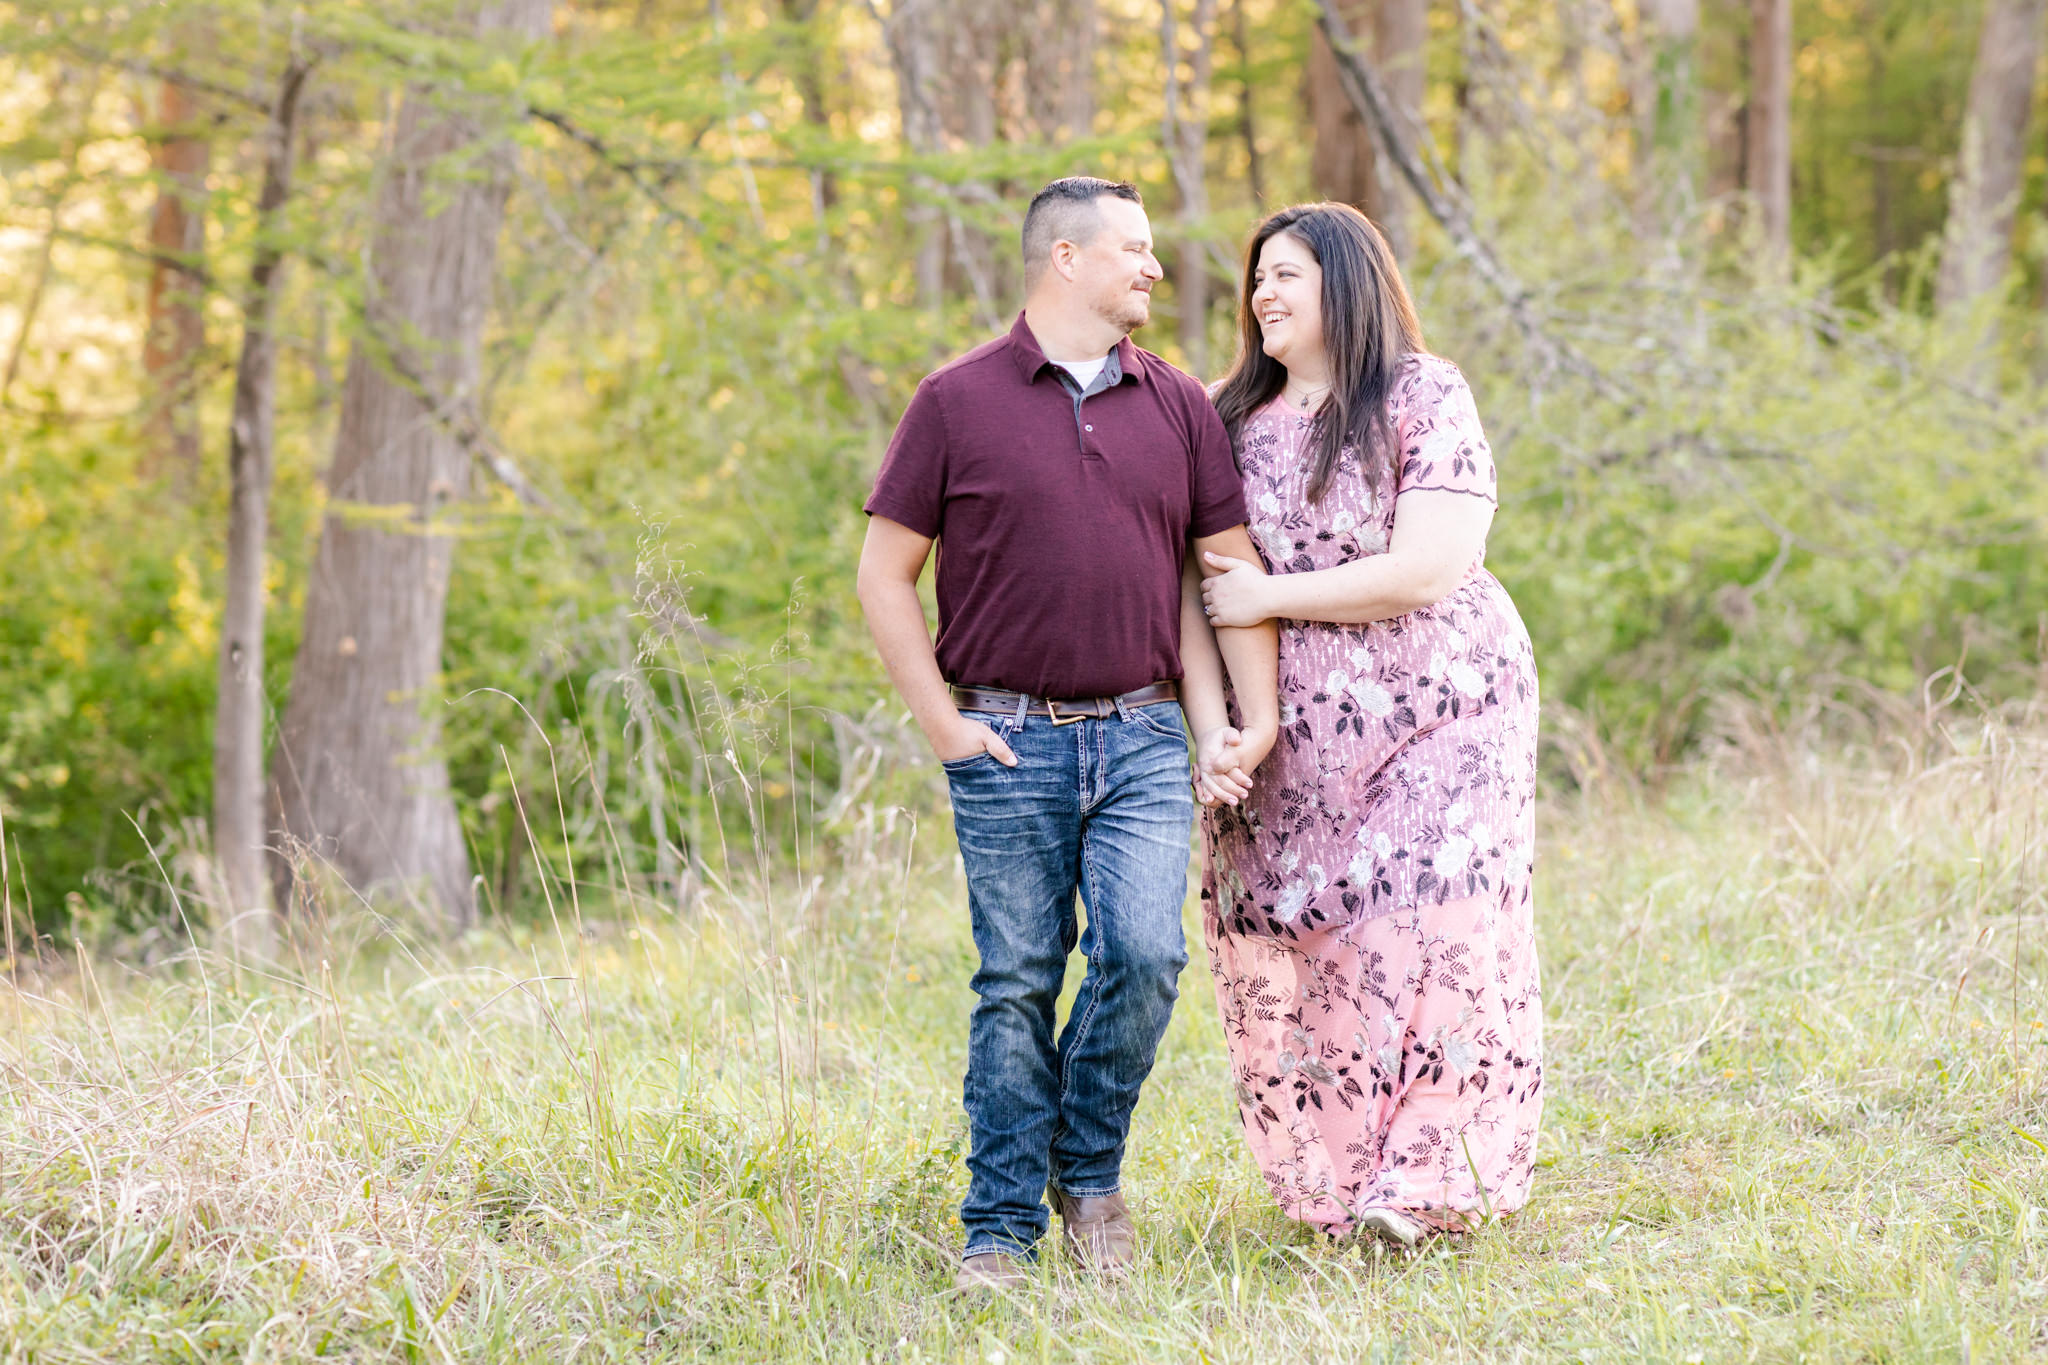 A Spring Engagement Session at Cibolo Nature Center in Boerne, TX by Dawn Elizabeth Studios, Boerne Wedding Photographer